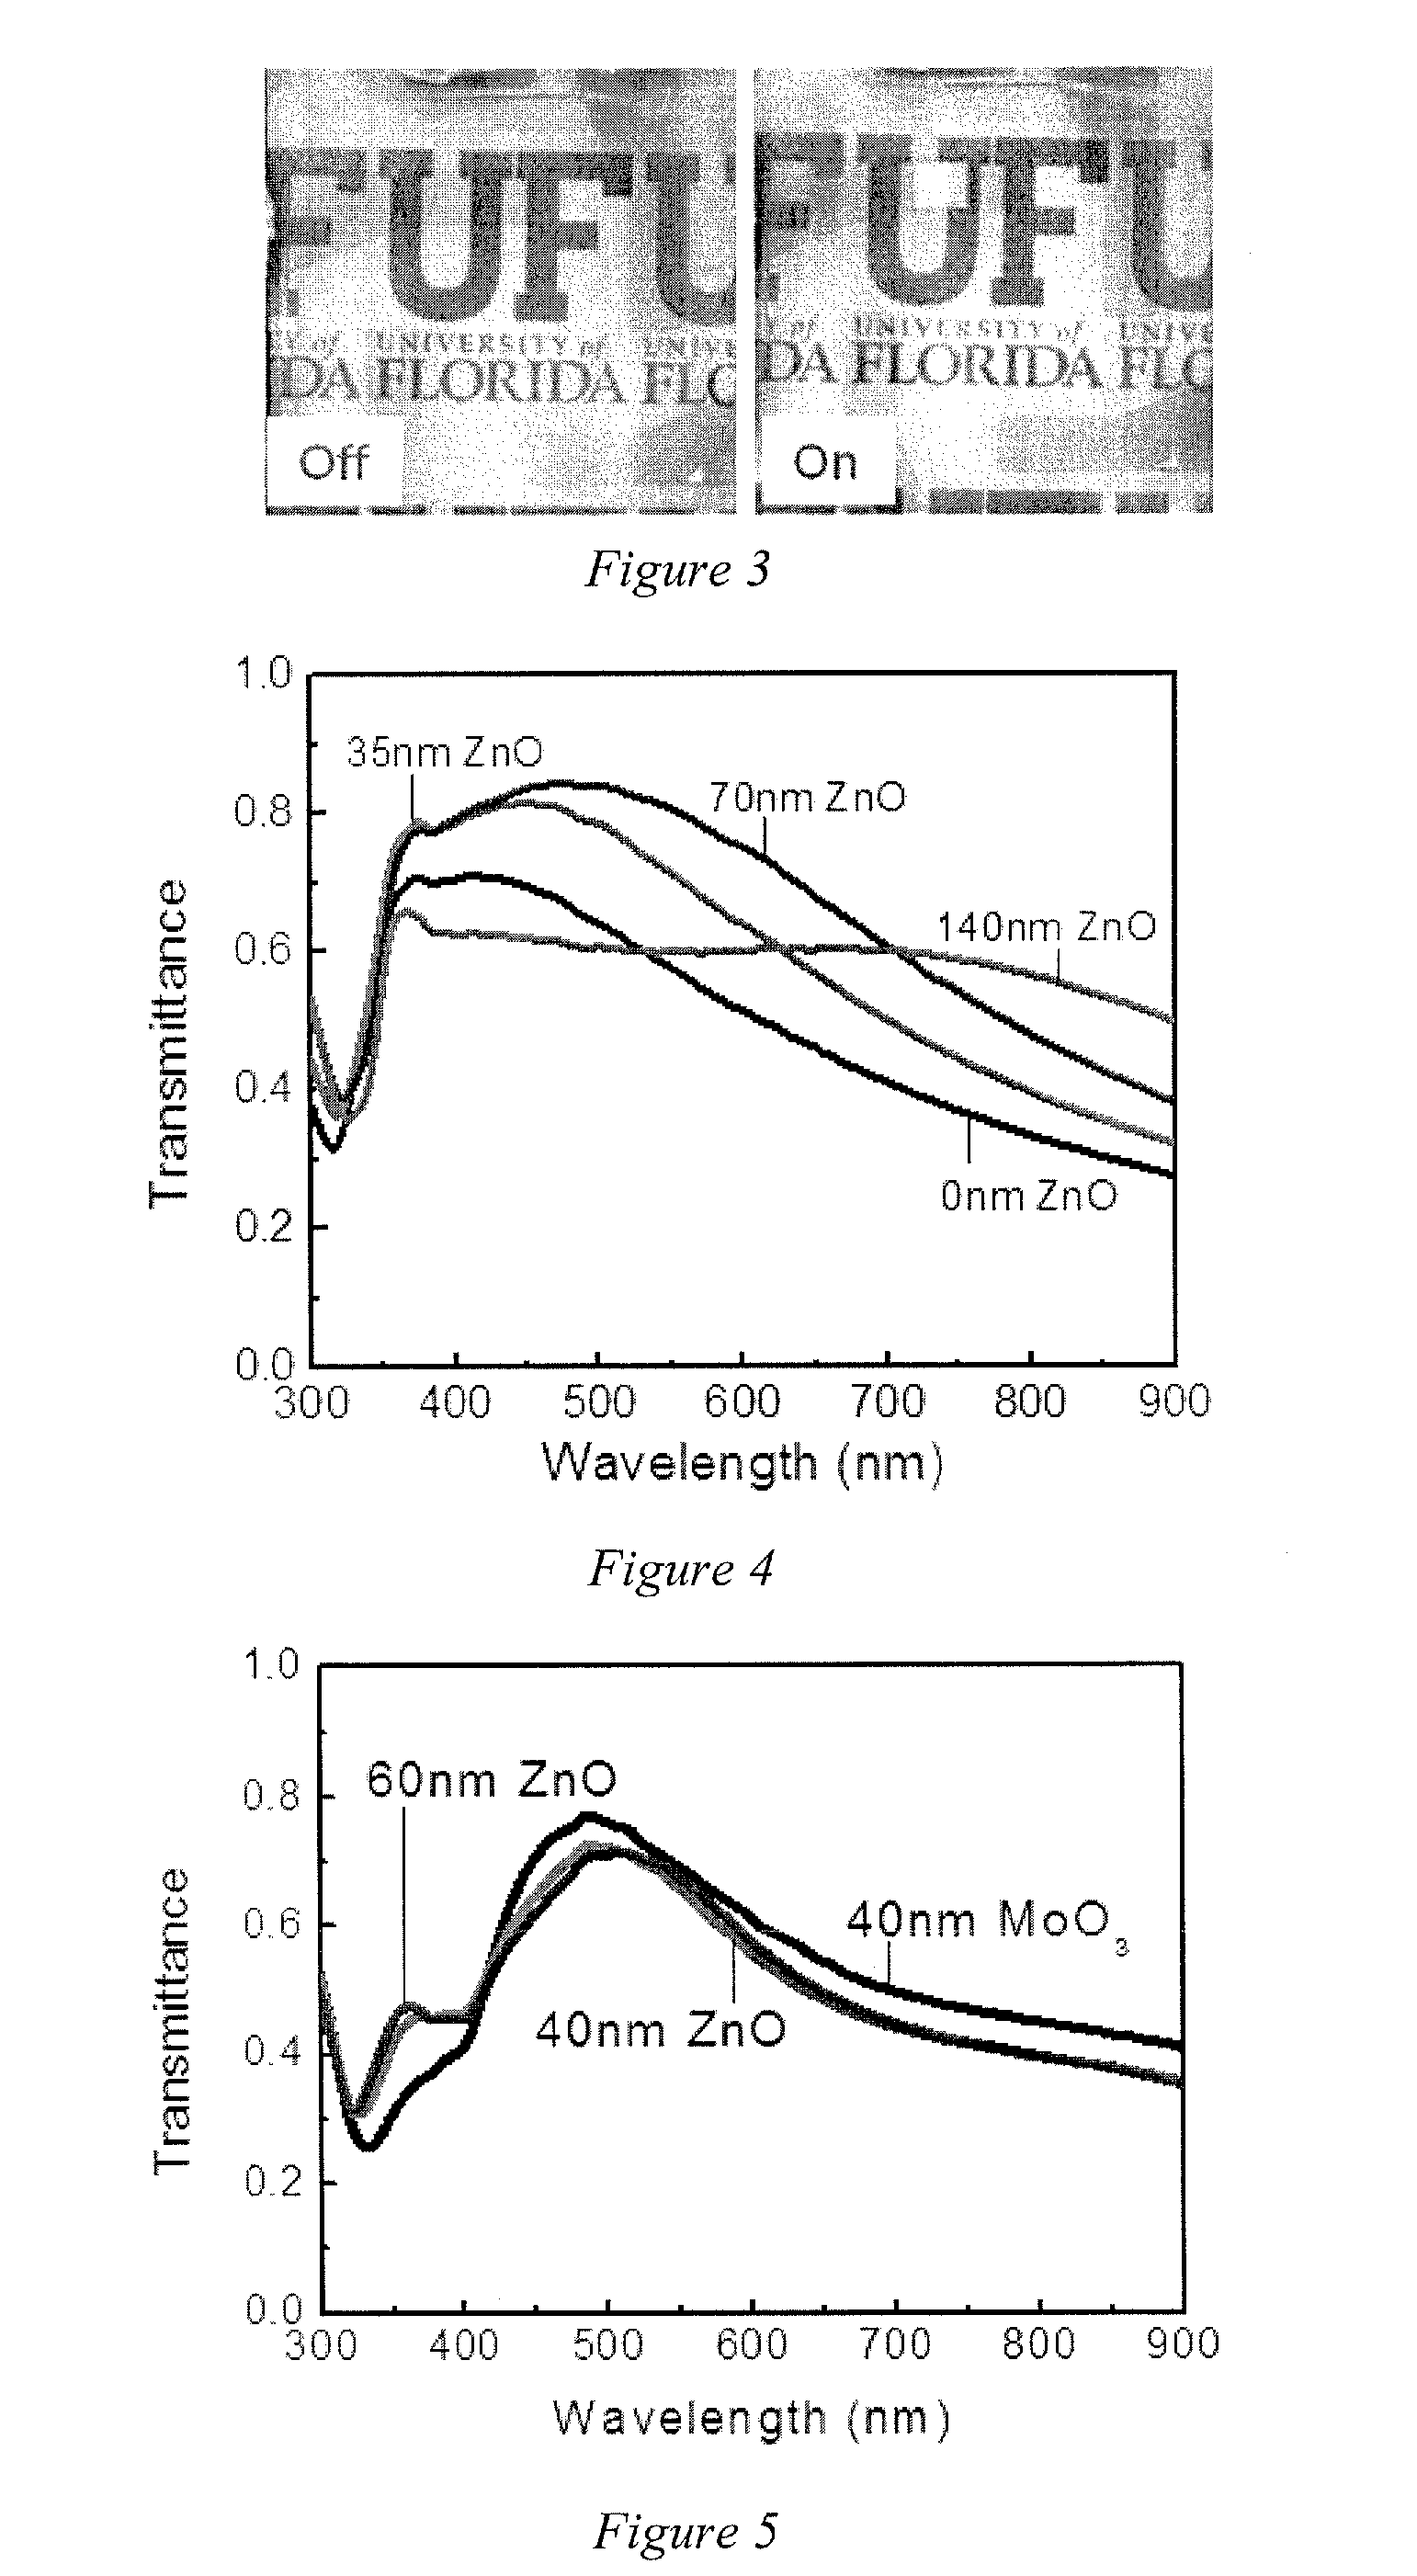 Transparent quantum dot light-emitting diodes with dielectric/metal/dielectric electrode